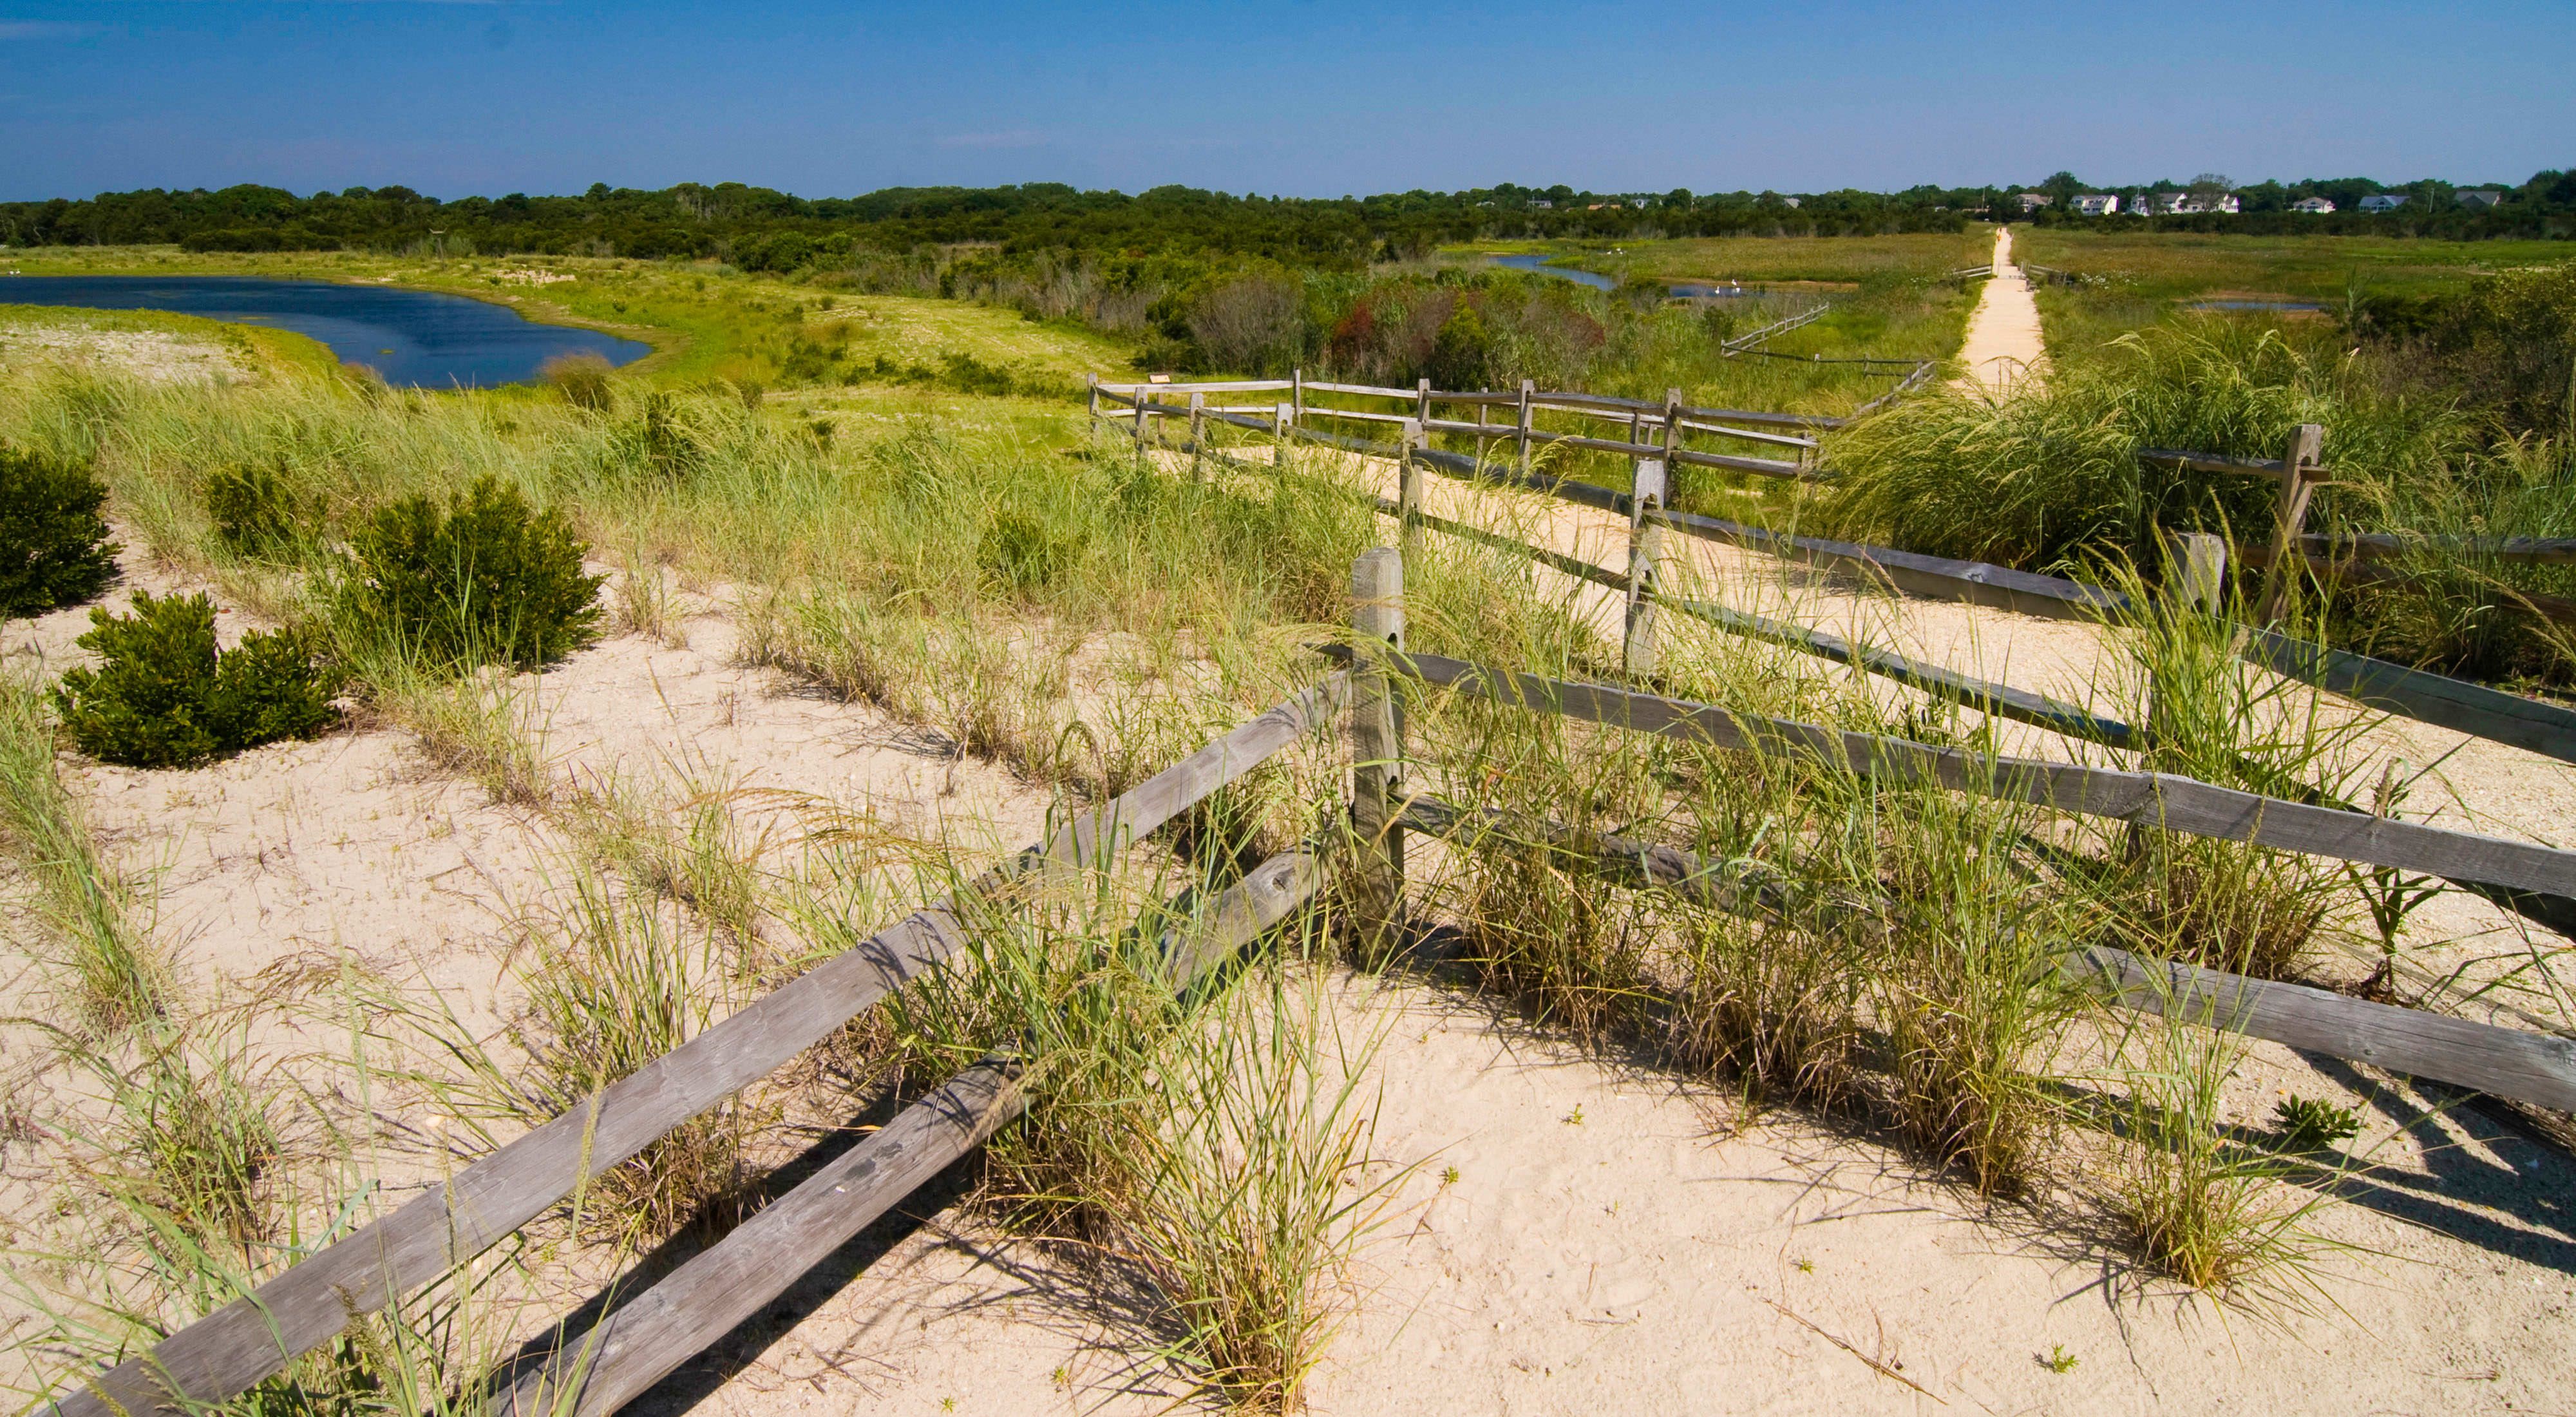 The South Cape May Meadows. Wooden fencing separating areas of grassy sand dunes with trees and houses in the distance.